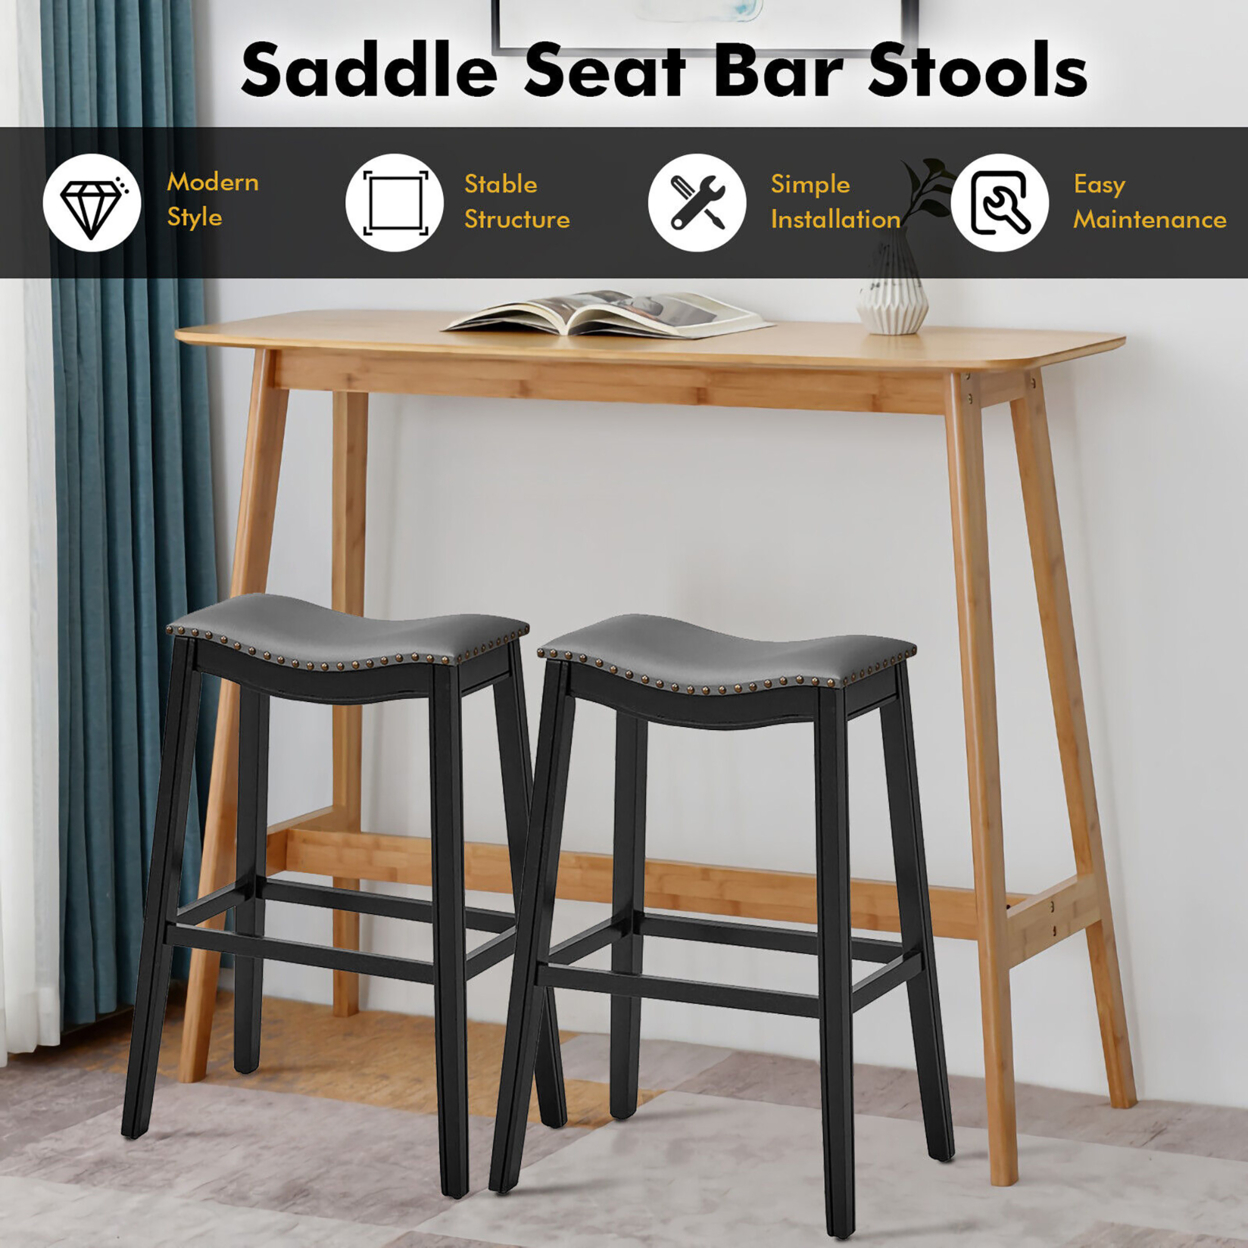 Set Of 2 Saddle Bar Stools Bar Height Kitchen Chairs W/ Rubber Wood Legs - Brown